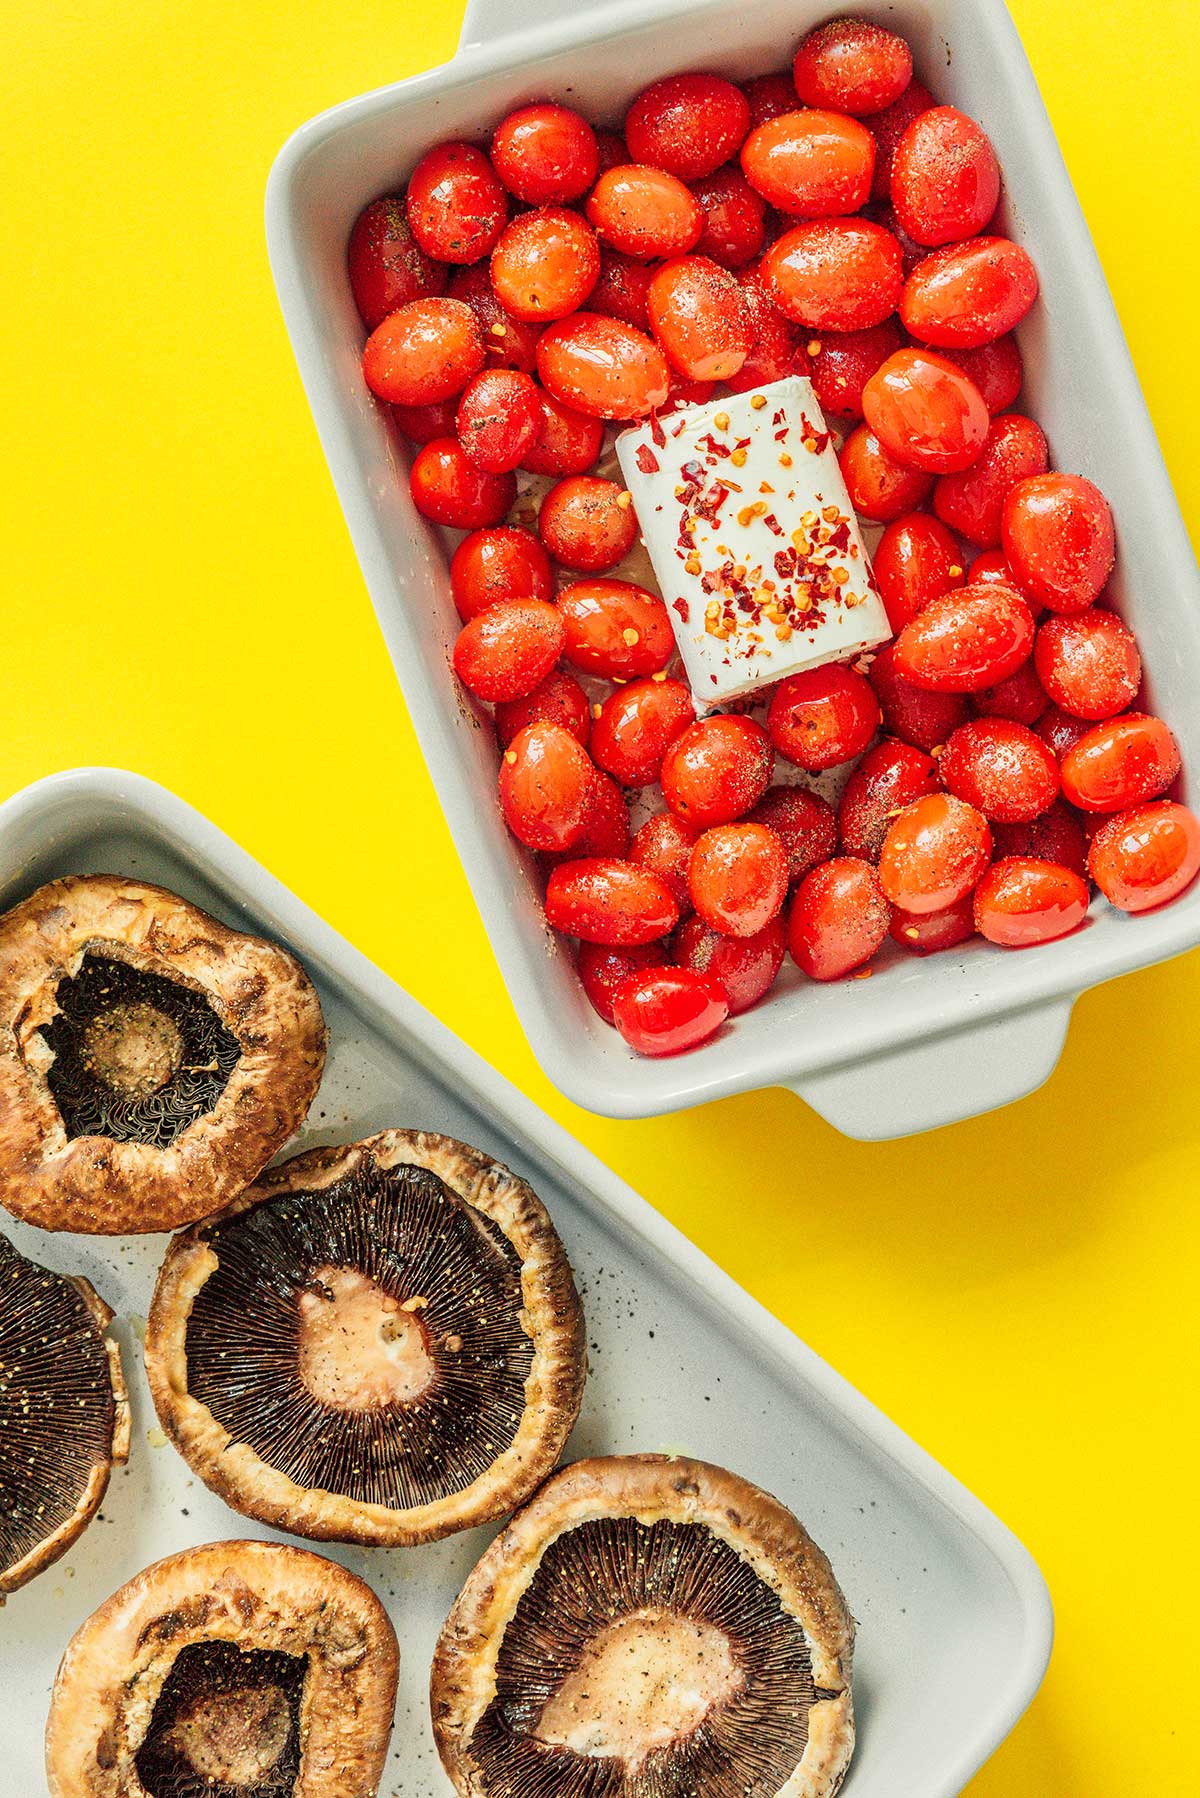 A casserole dish filled with uncooked cherry tomatoes and goat cheese beside a baking tray filled with portobello mushrooms